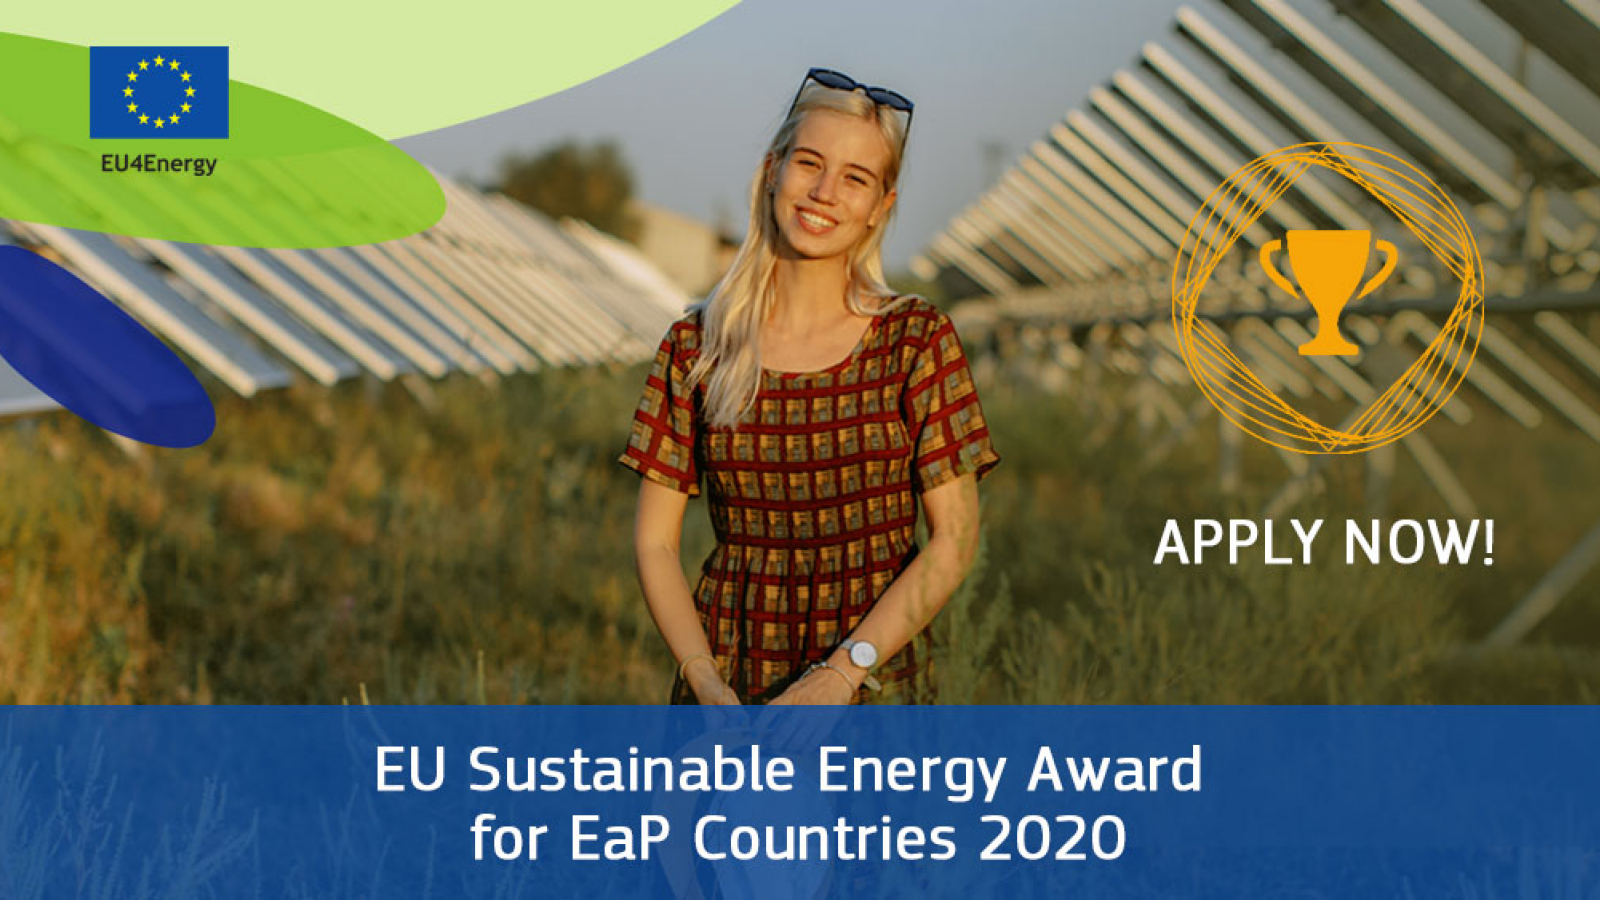 Applications for the 2020 EU Sustainable Energy Award for the Eastern Partnership are still open